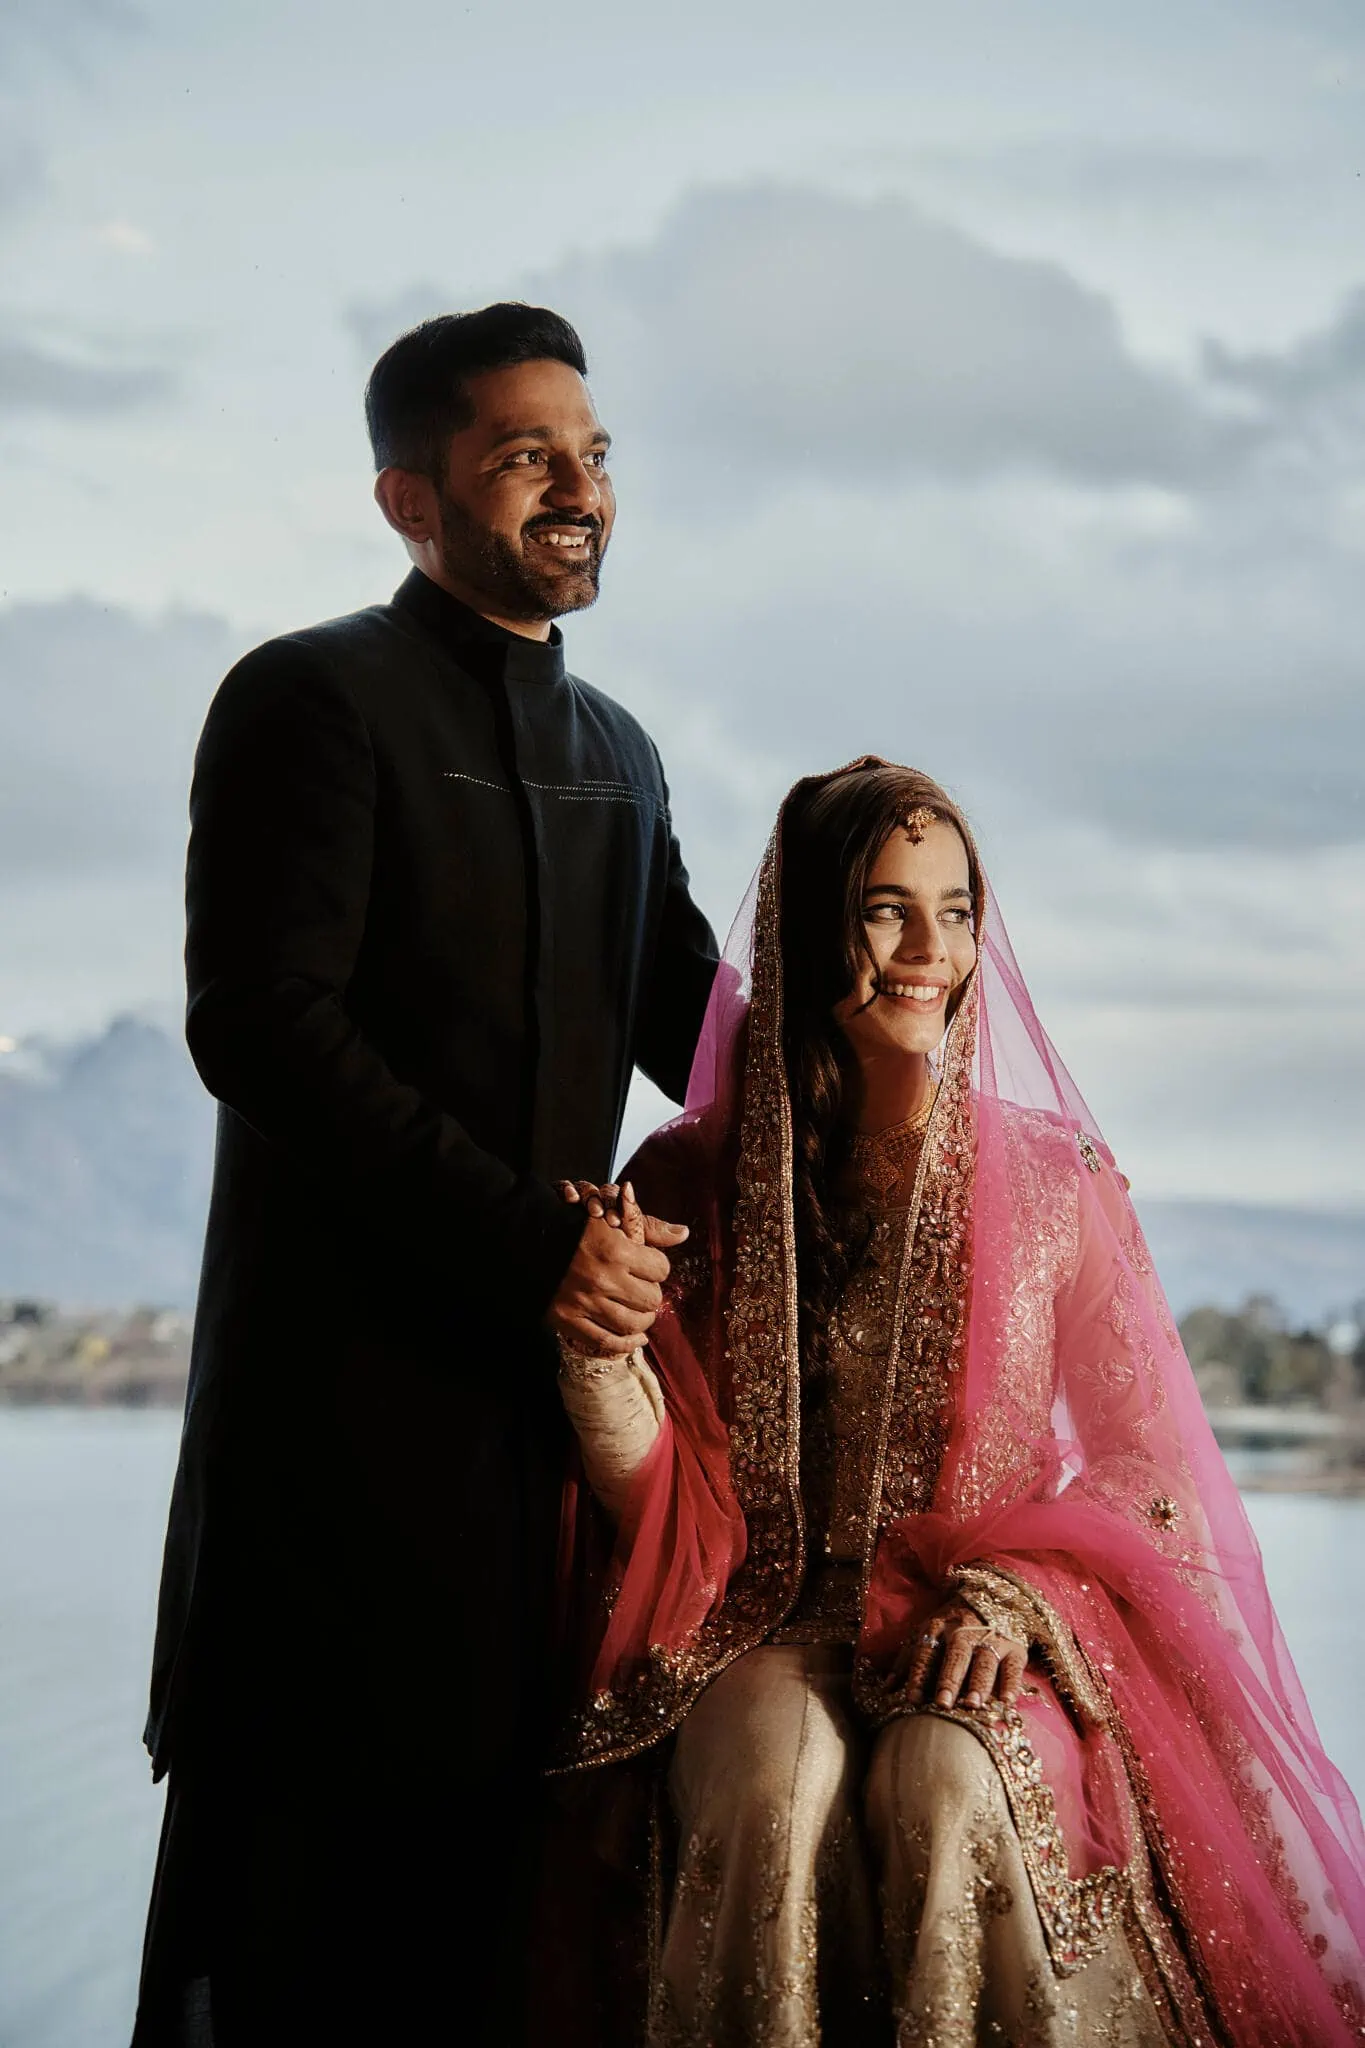 Queenstown New Zealand Elopement Wedding Photographer - Wasim and Yumn, a couple, posing for a photo by the water at their Queenstown Islamic wedding.